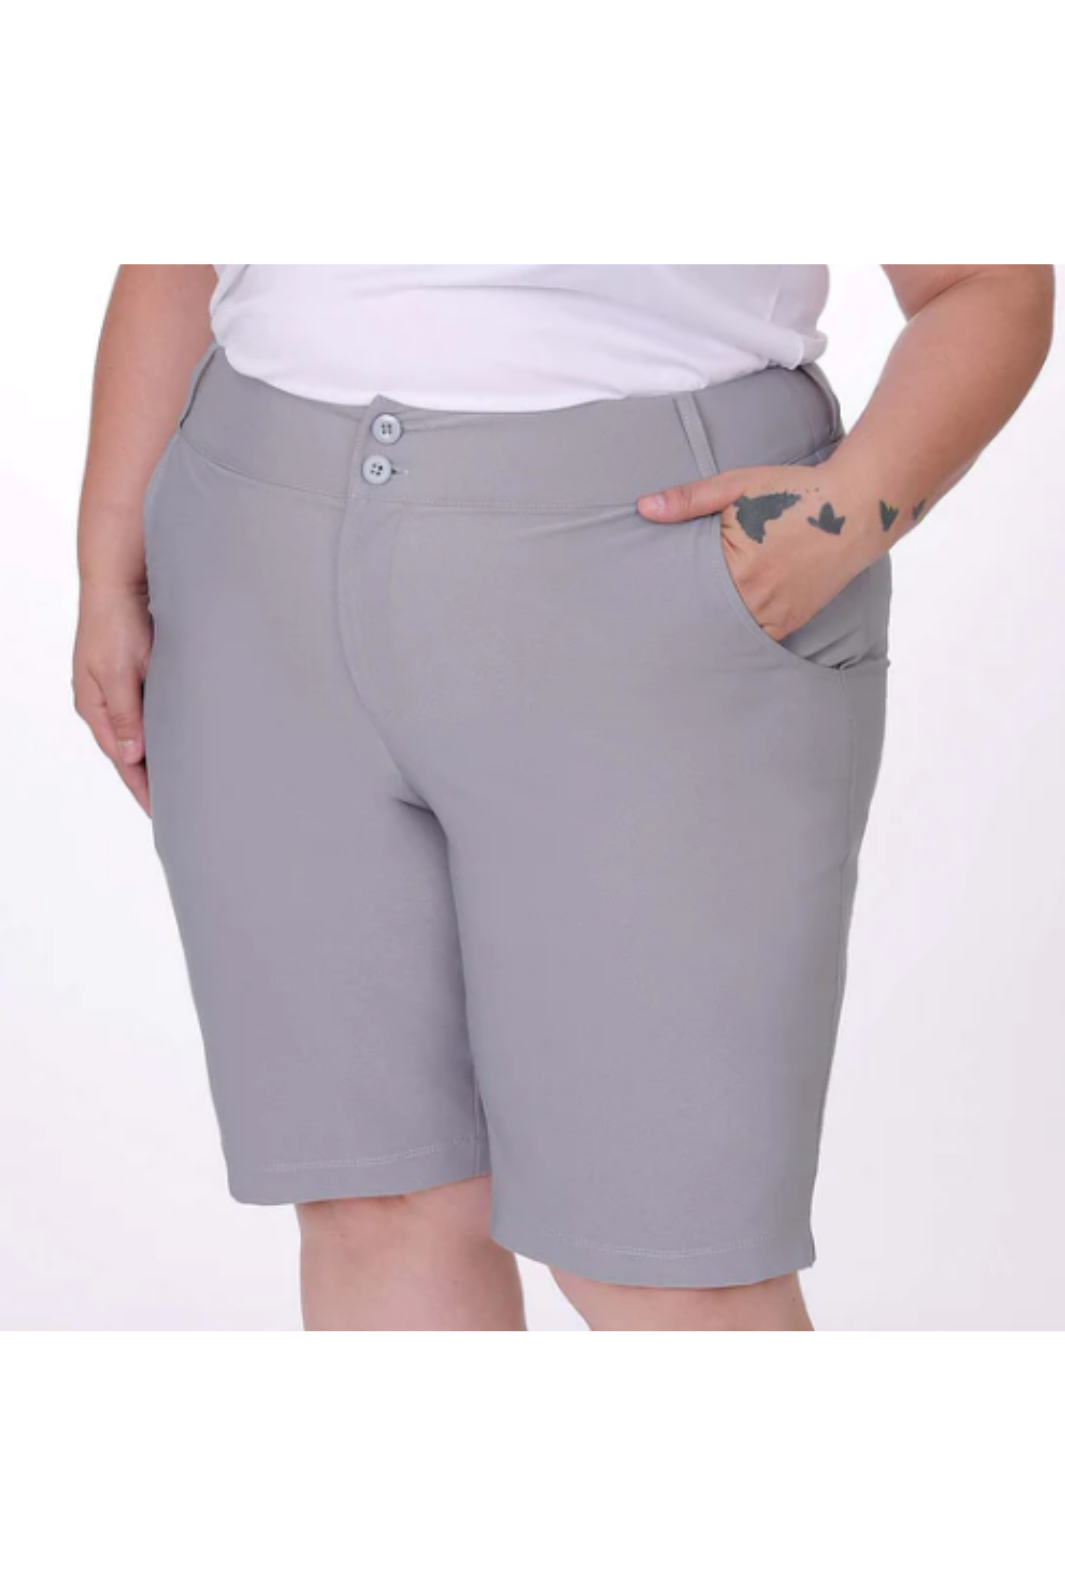 Plus Size Sunset Max Golf Bermuda Shorts by Sportive Plus